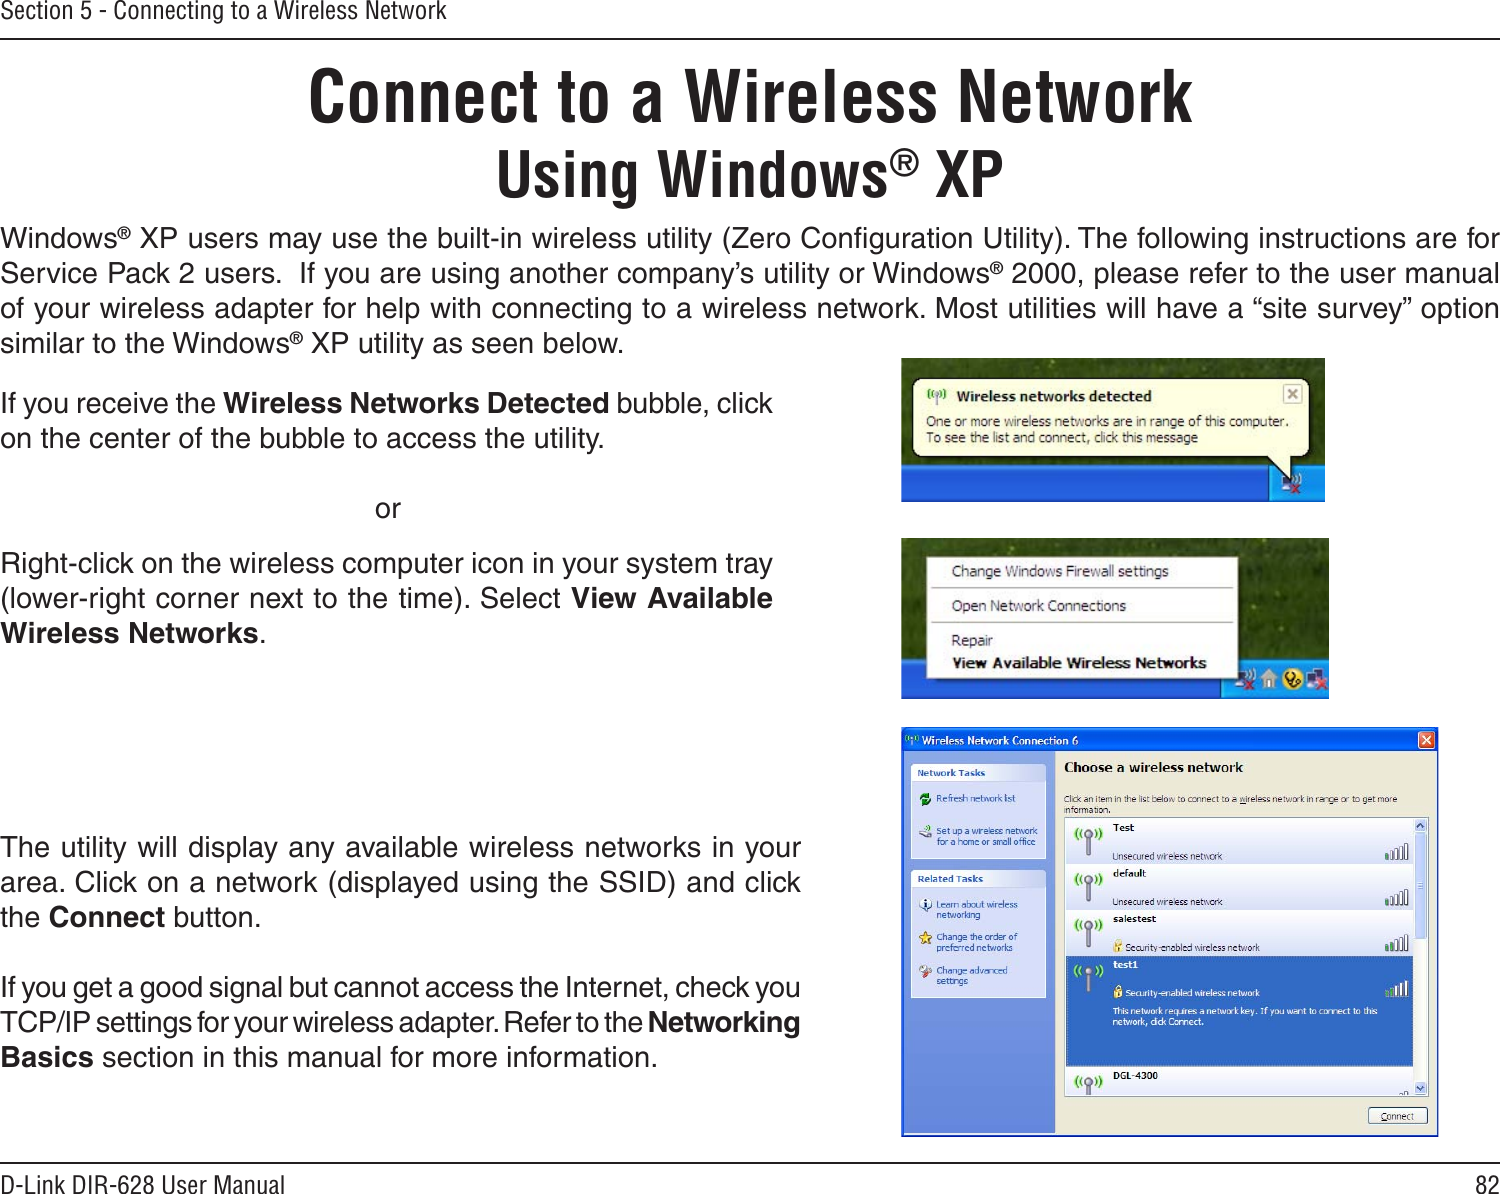 82D-Link DIR-628 User ManualSection 5 - Connecting to a Wireless NetworkConnect to a Wireless NetworkUsing Windows® XPWindows® XP users may use the built-in wireless utility (Zero Conﬁguration Utility). The following instructions are for Service Pack 2 users.  If you are using another company’s utility or Windows® 2000, please refer to the user manual of your wireless adapter for help with connecting to a wireless network. Most utilities will have a “site survey” option similar to the Windows® XP utility as seen below.Right-click on the wireless computer icon in your system tray (lower-right corner next to the time). Select View Available Wireless Networks.If you receive the Wireless Networks Detected bubble, click on the center of the bubble to access the utility.     orThe utility will display any available wireless networks in your area. Click on a network (displayed using the SSID) and click the Connect button.If you get a good signal but cannot access the Internet, check you TCP/IP settings for your wireless adapter. Refer to the Networking Basics section in this manual for more information.